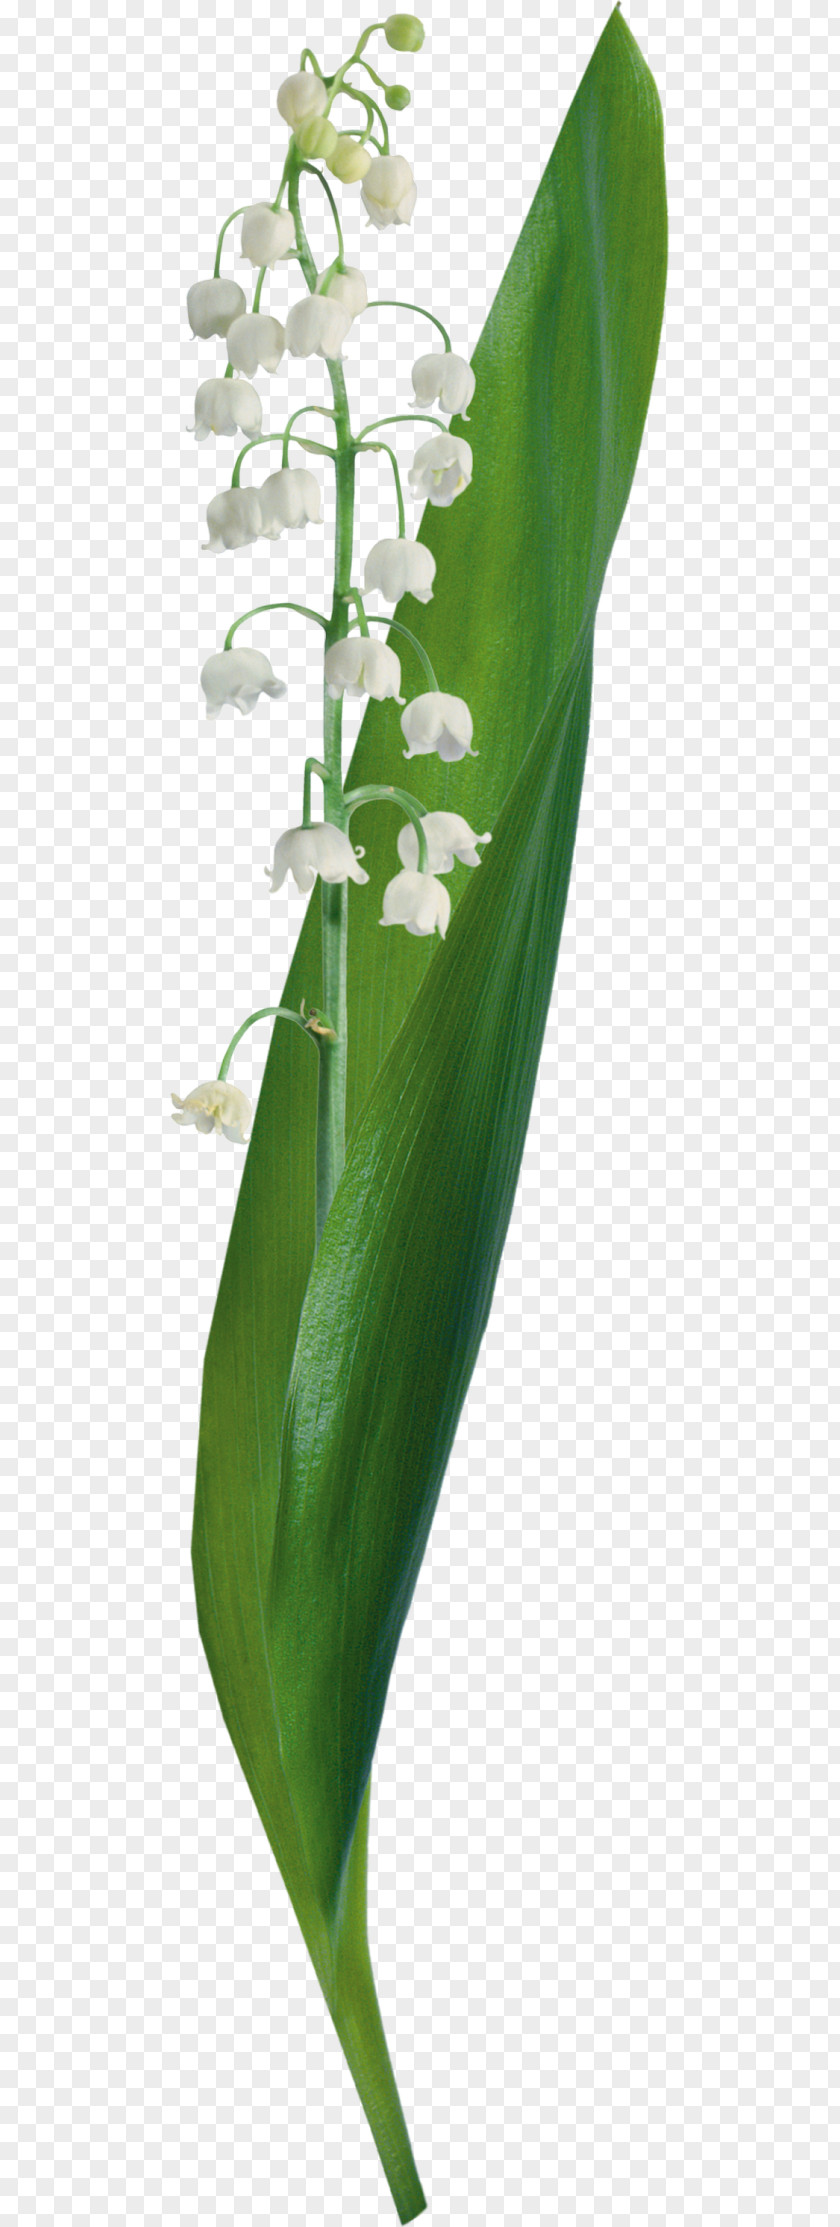 Arrangement Lily Of The Valley Flower LiveInternet Venice Carnival Yandex Search PNG